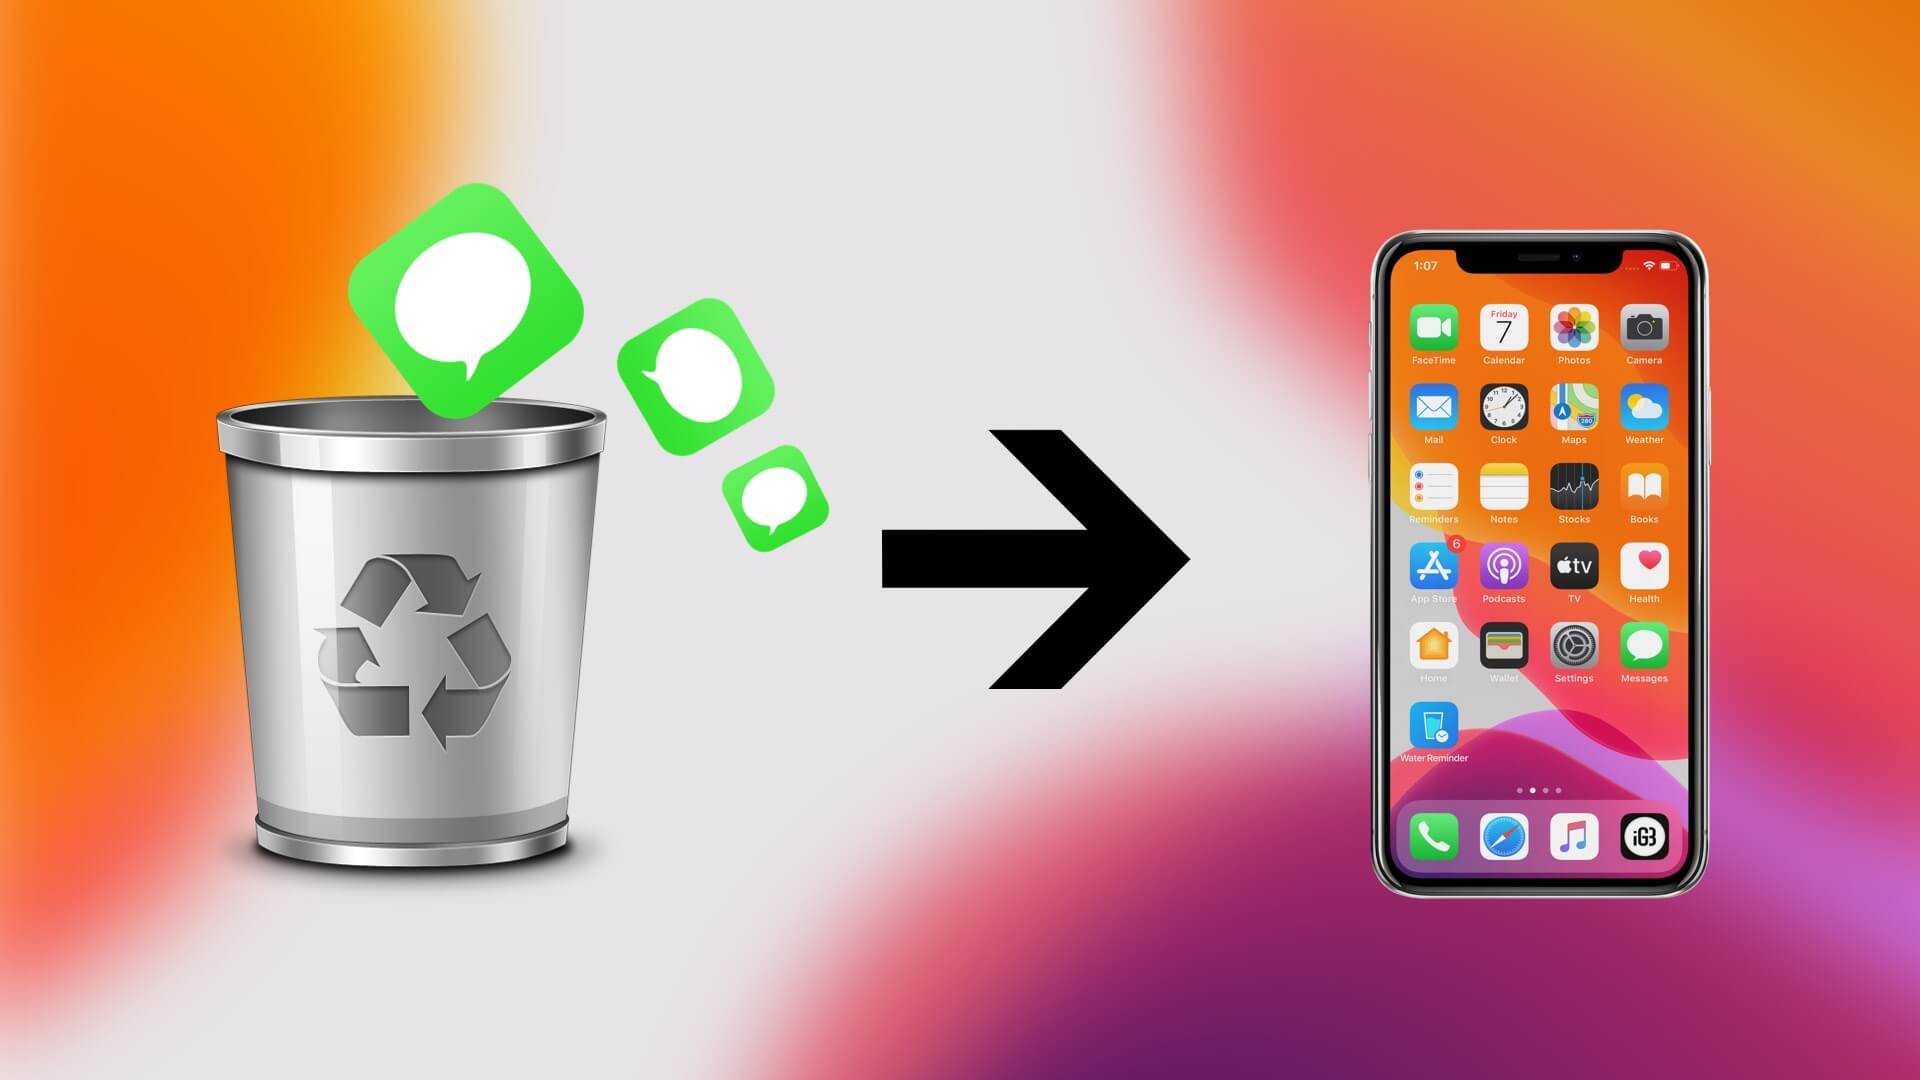 How to Recover Deleted Text Messages on iPhone